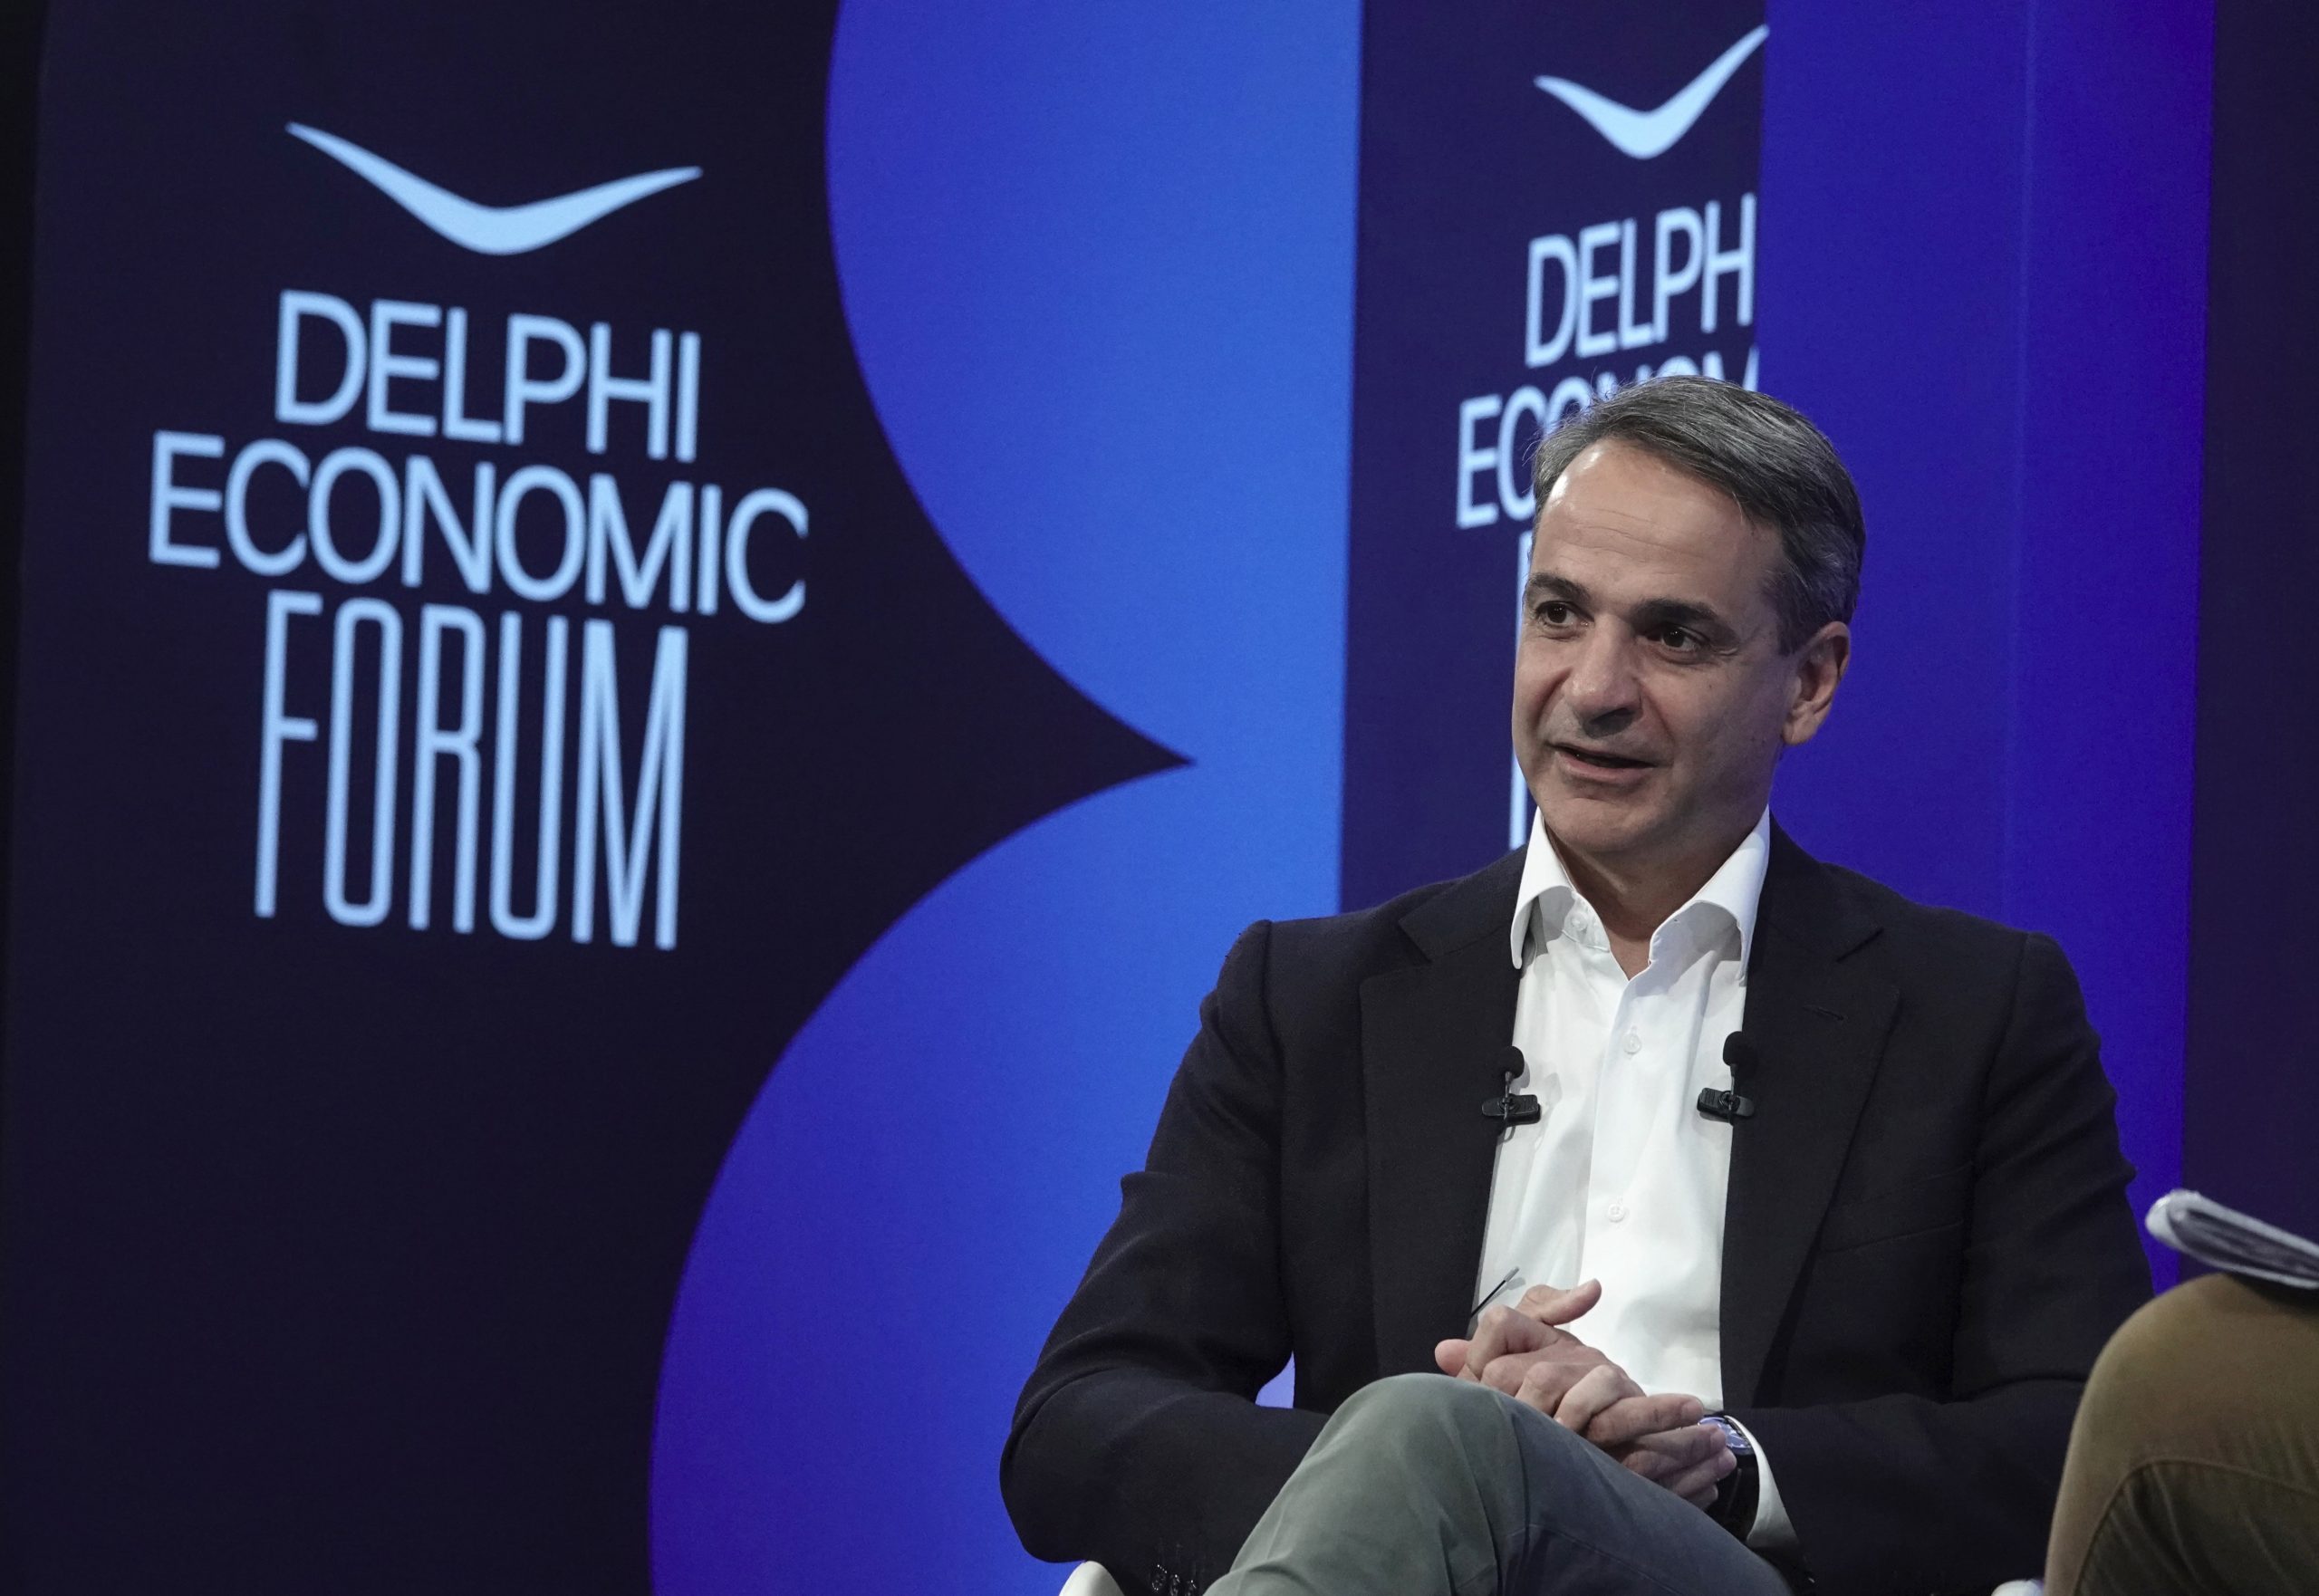 epa10597332 Greek Prime Minister Kyriakos Mitsotakis speaks speaks during the Delphi Economic Forum VIII in Delphi, Greece, 28 April 2023. The Forum engages political, economic, business and academic leaders in an effort to address emerging challenges, influence the national and regional agendas and promote sustainable and socially responsible growth policies for Europe, the wider Eastern Mediterranean and Greece, according to the event’s organizers.  EPA/CHARIS AKRIVIADIS